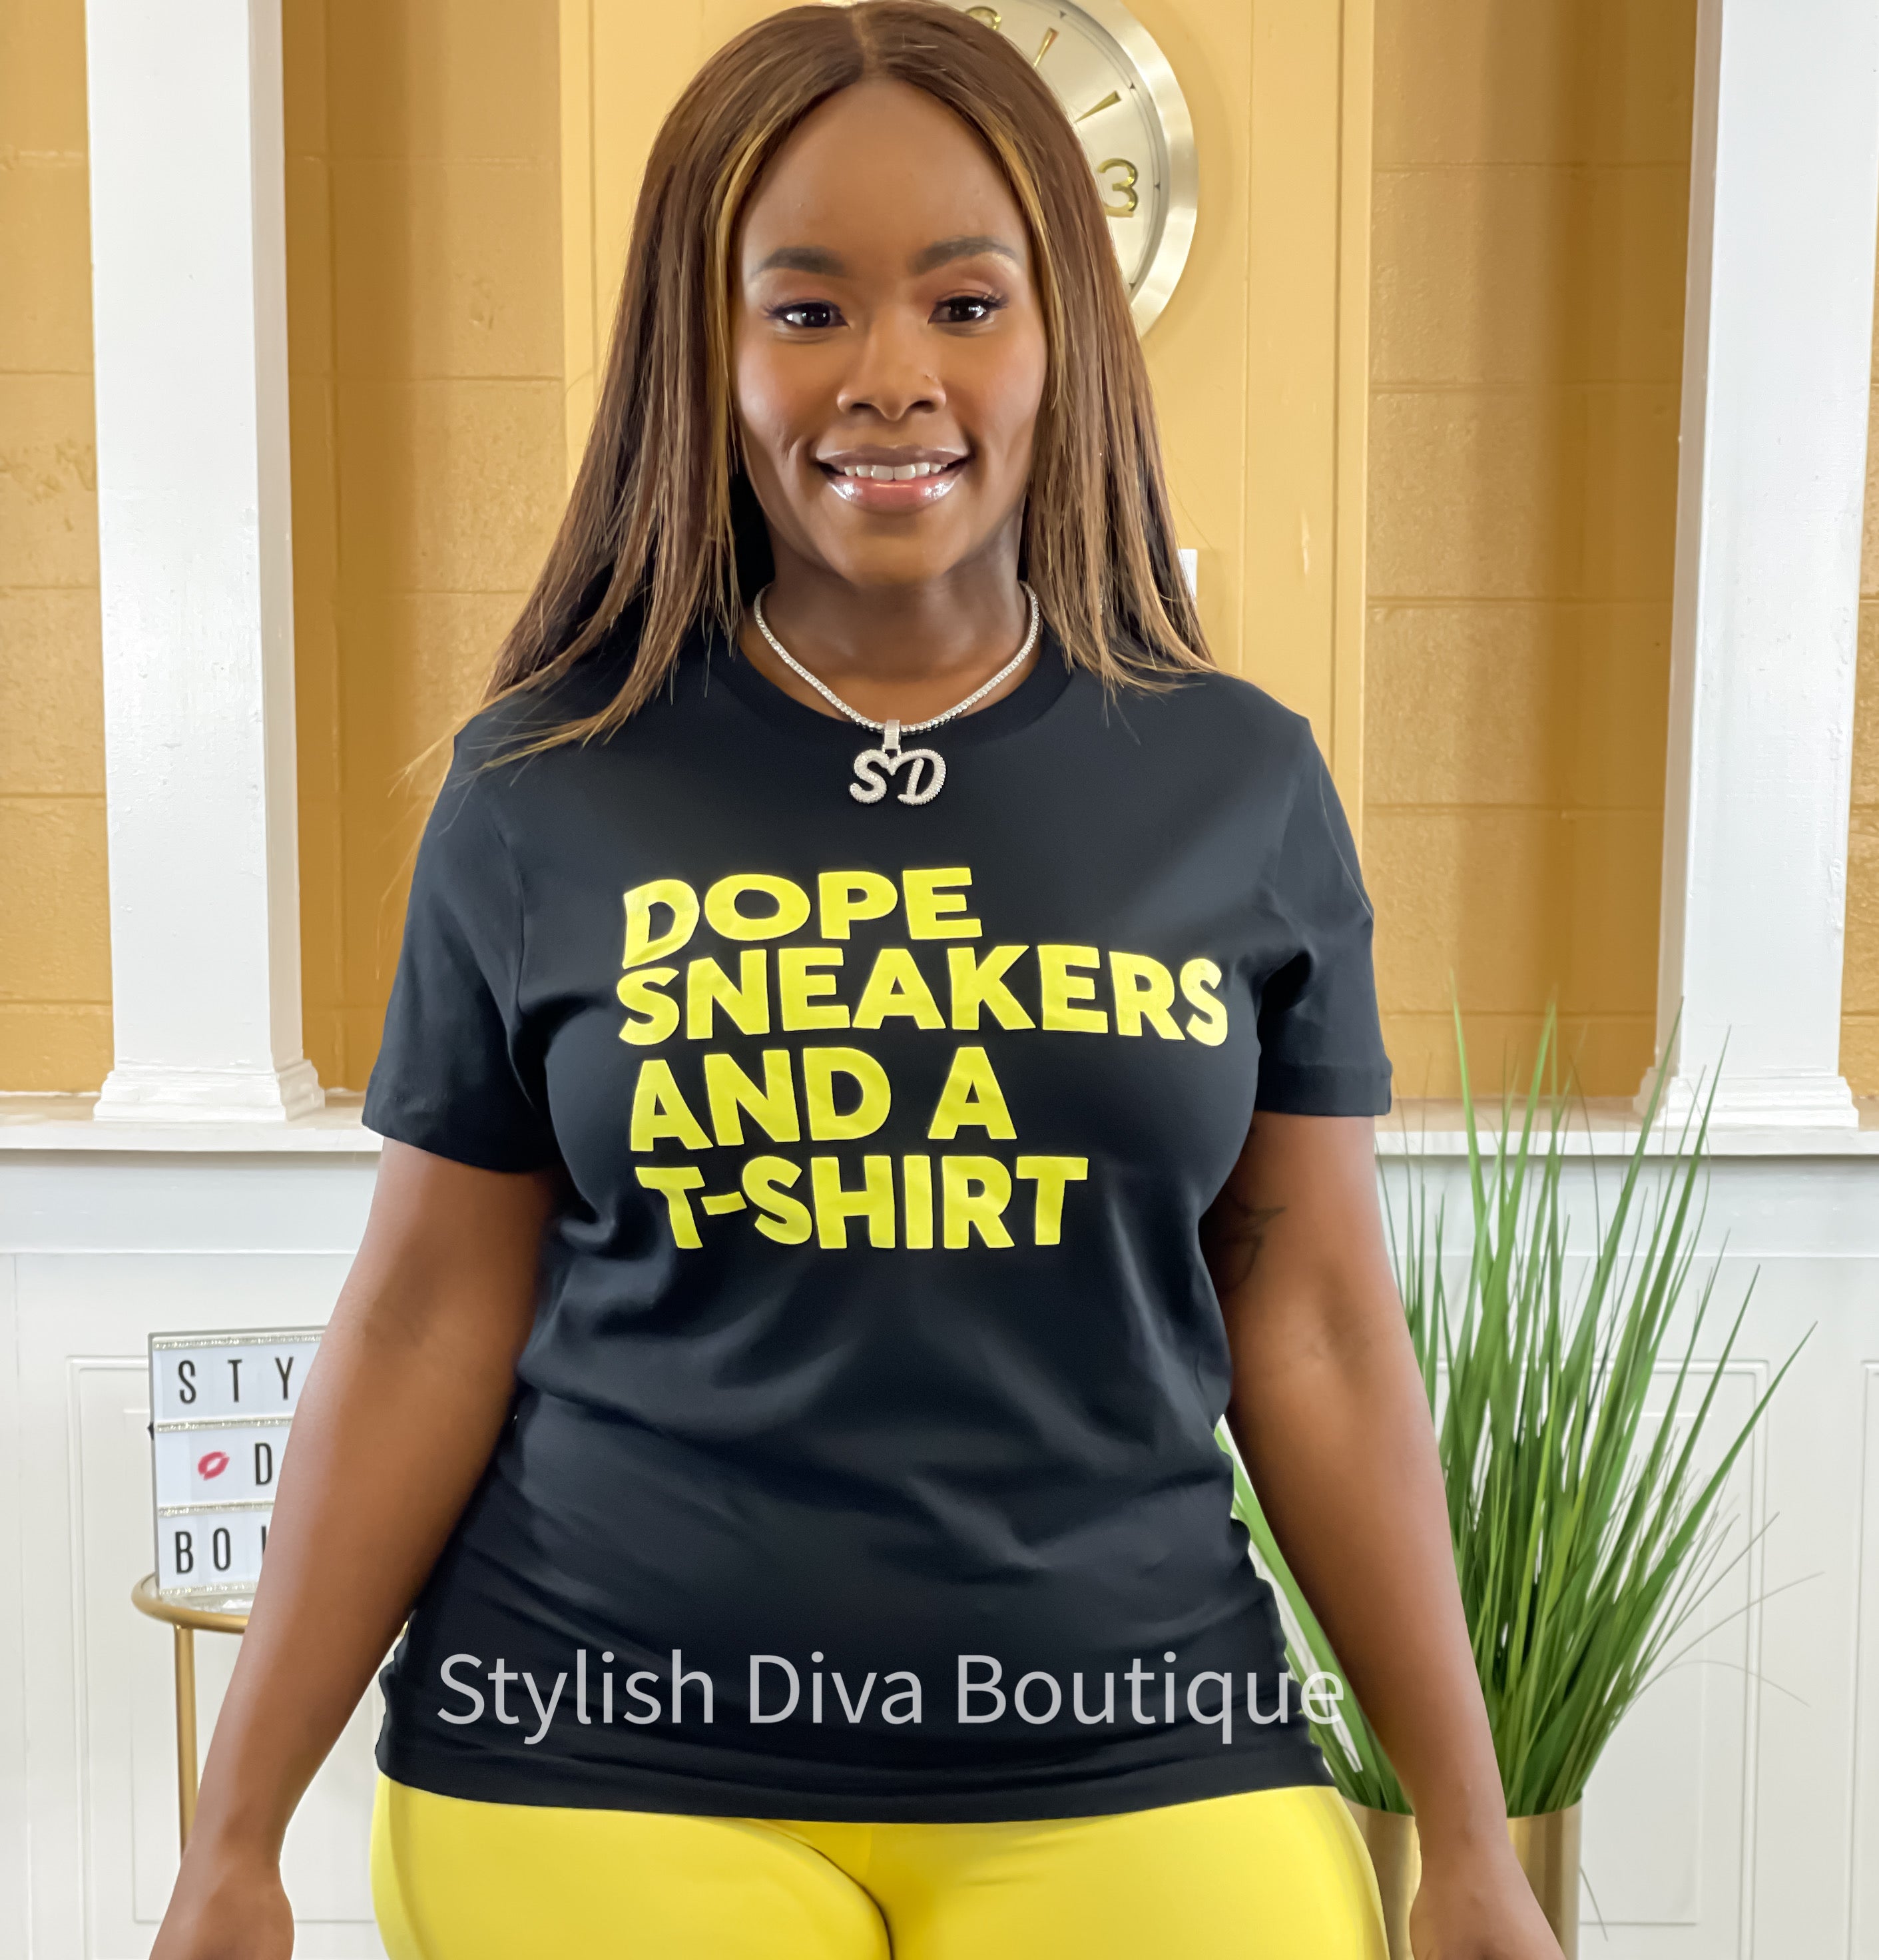 Dope Sneakers and T-Shirt (Black/Yellow Print) – Stylish Diva Boutique